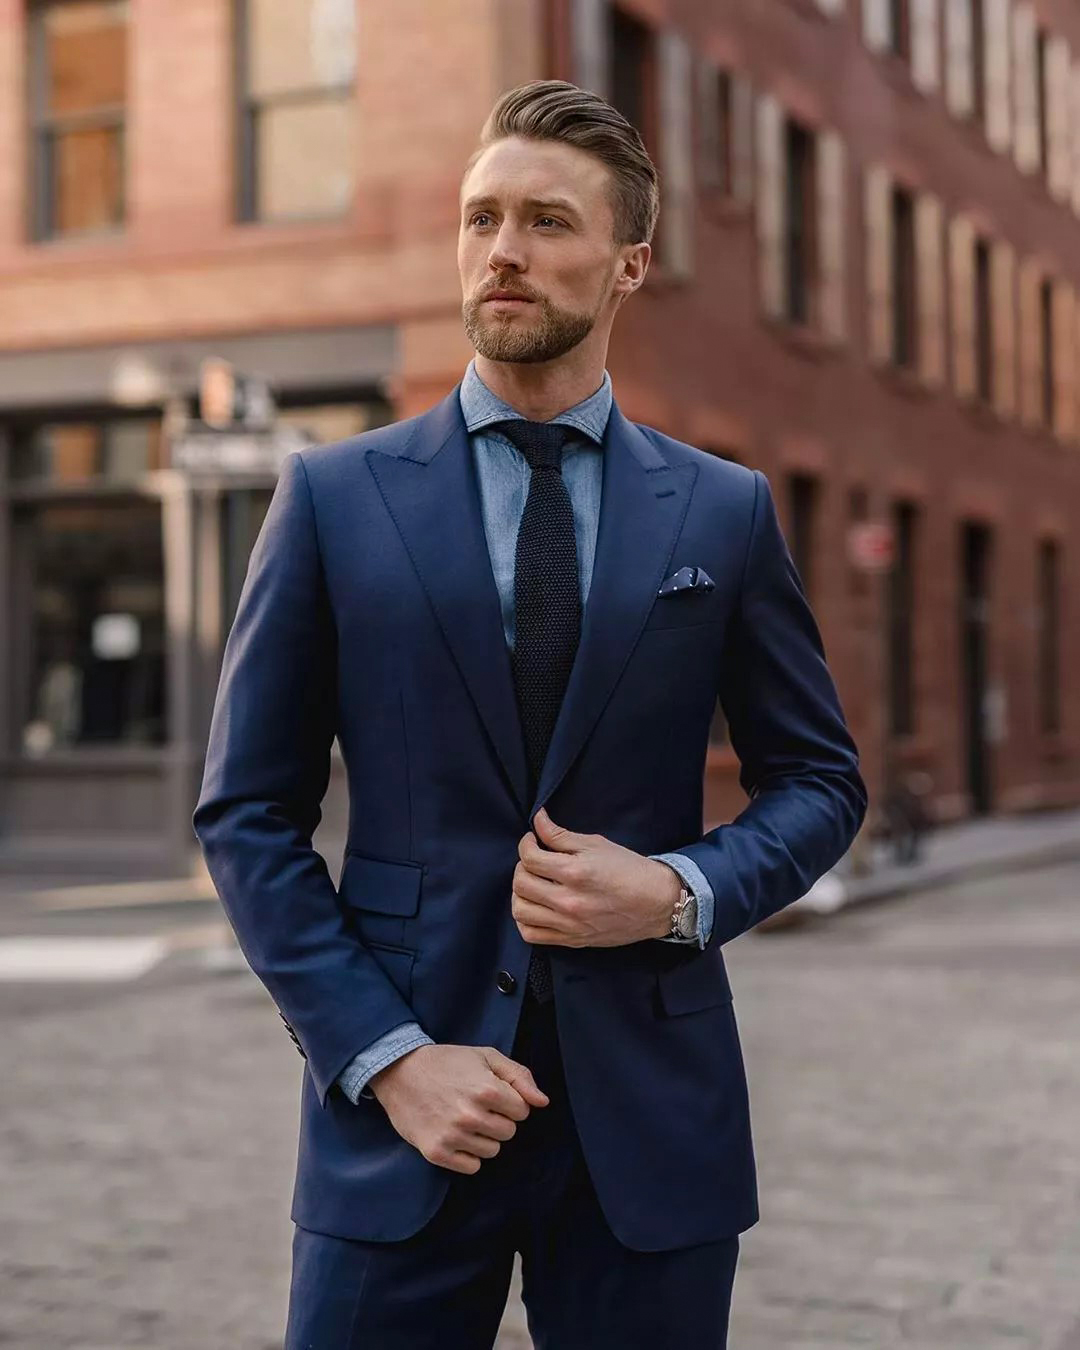 What Color Of Tie Goes With Navy Blue Suit - Jemitwc